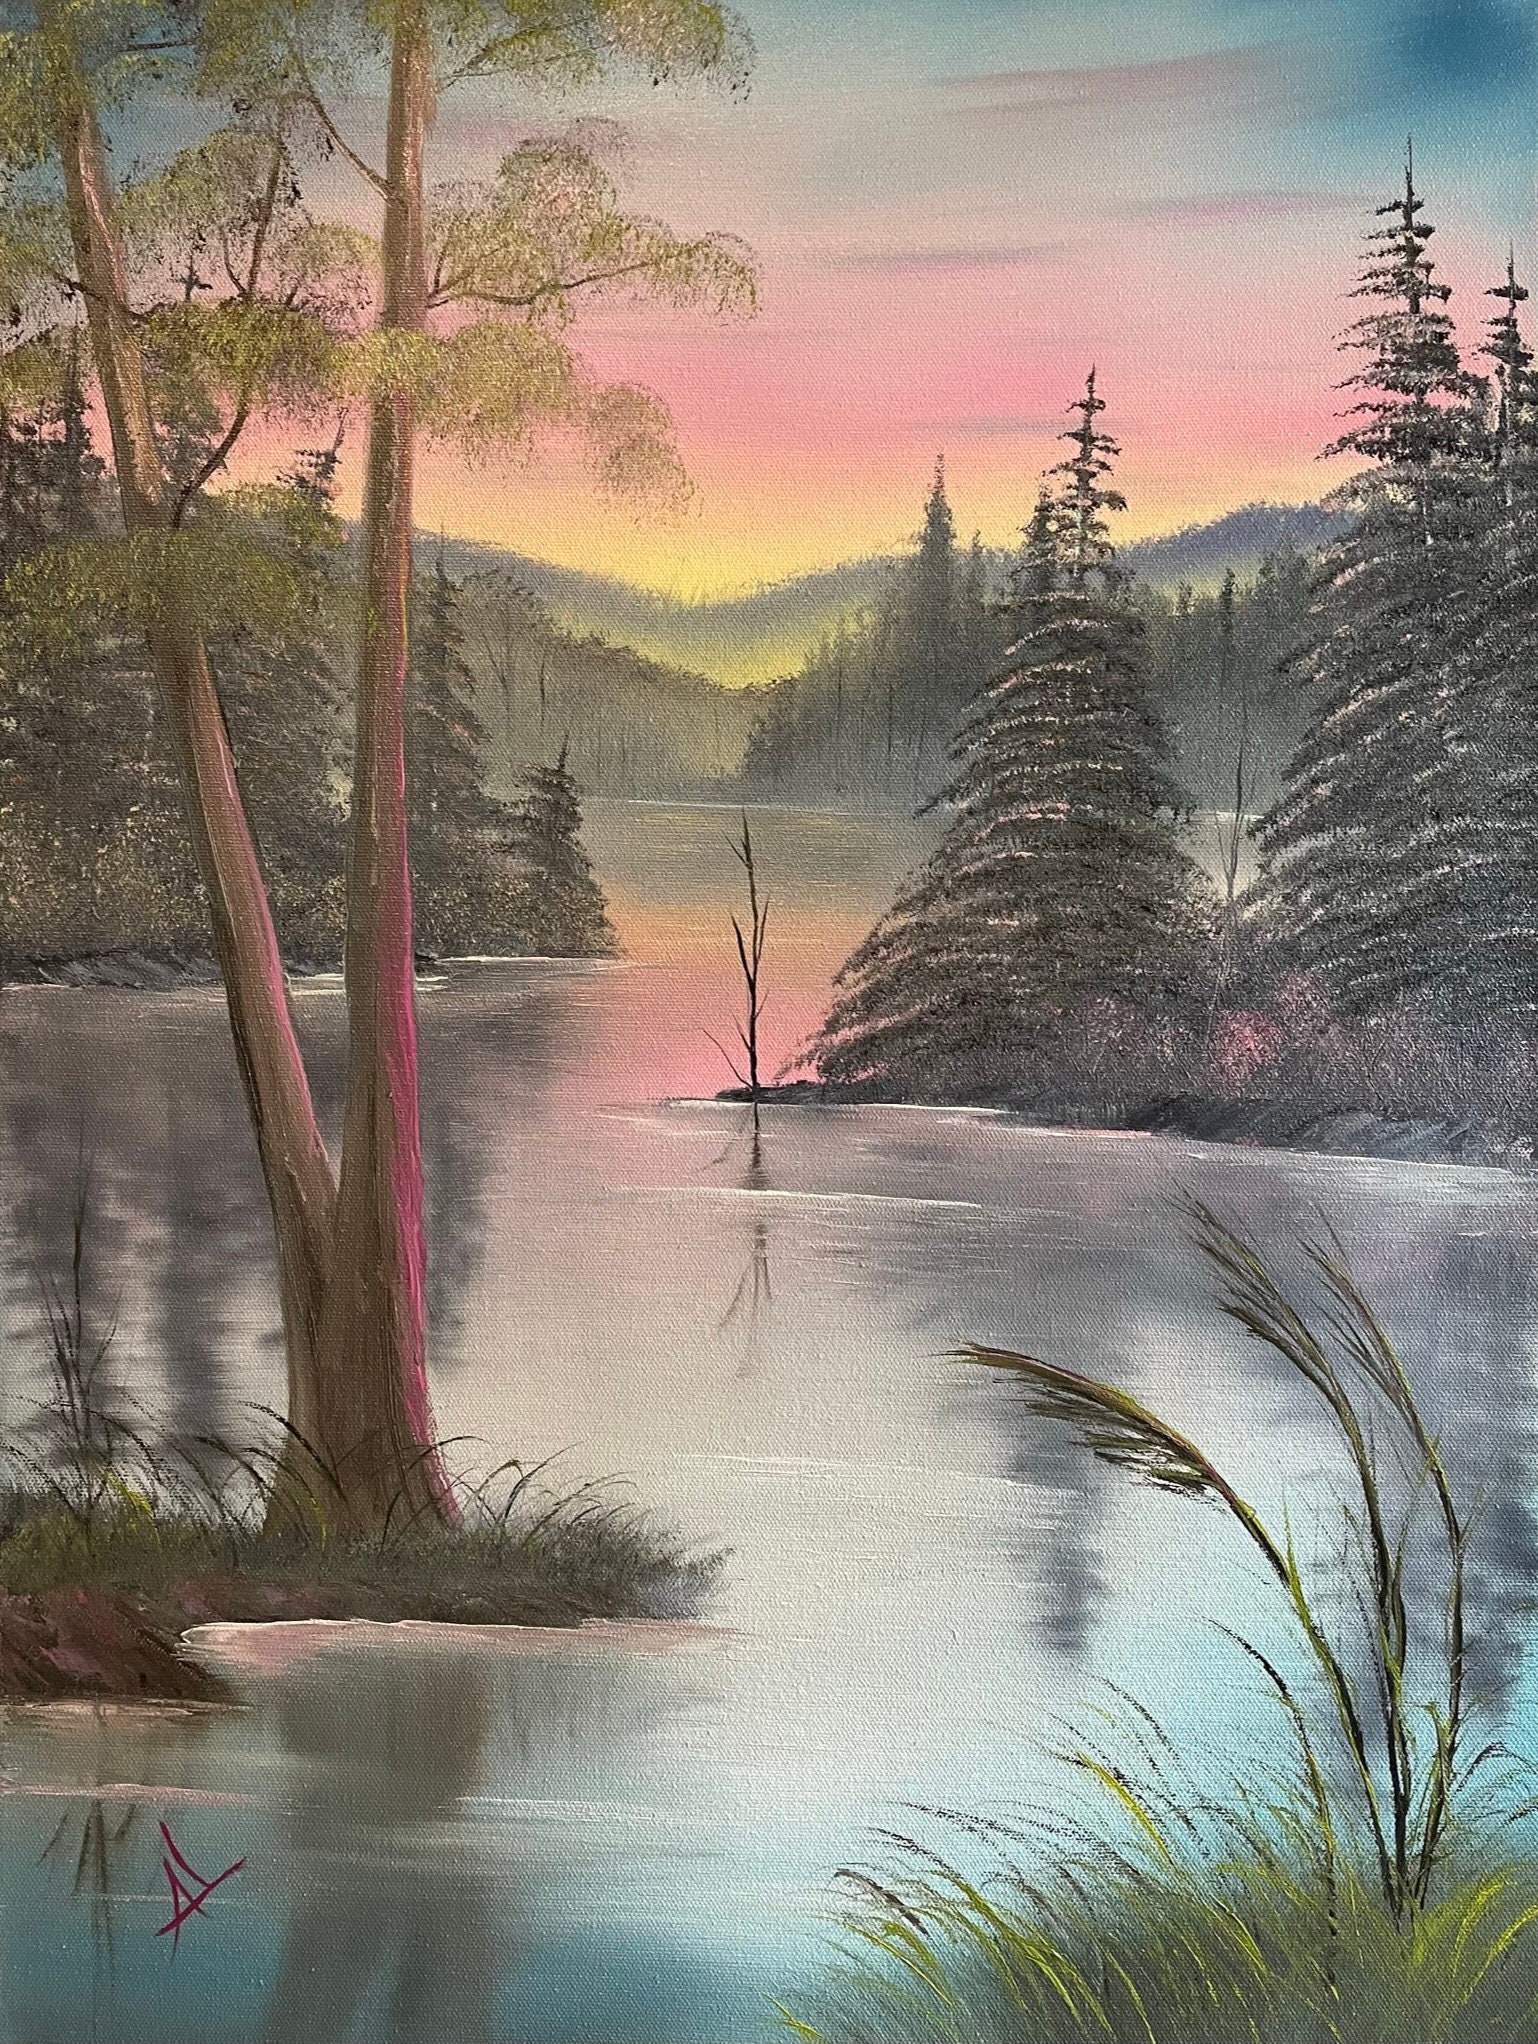 Original Oil Painting A Colorful Lake Sunset 16 X 20 Stretched Canvas Wall  Art Great for Gifts Large Landscape Painting 